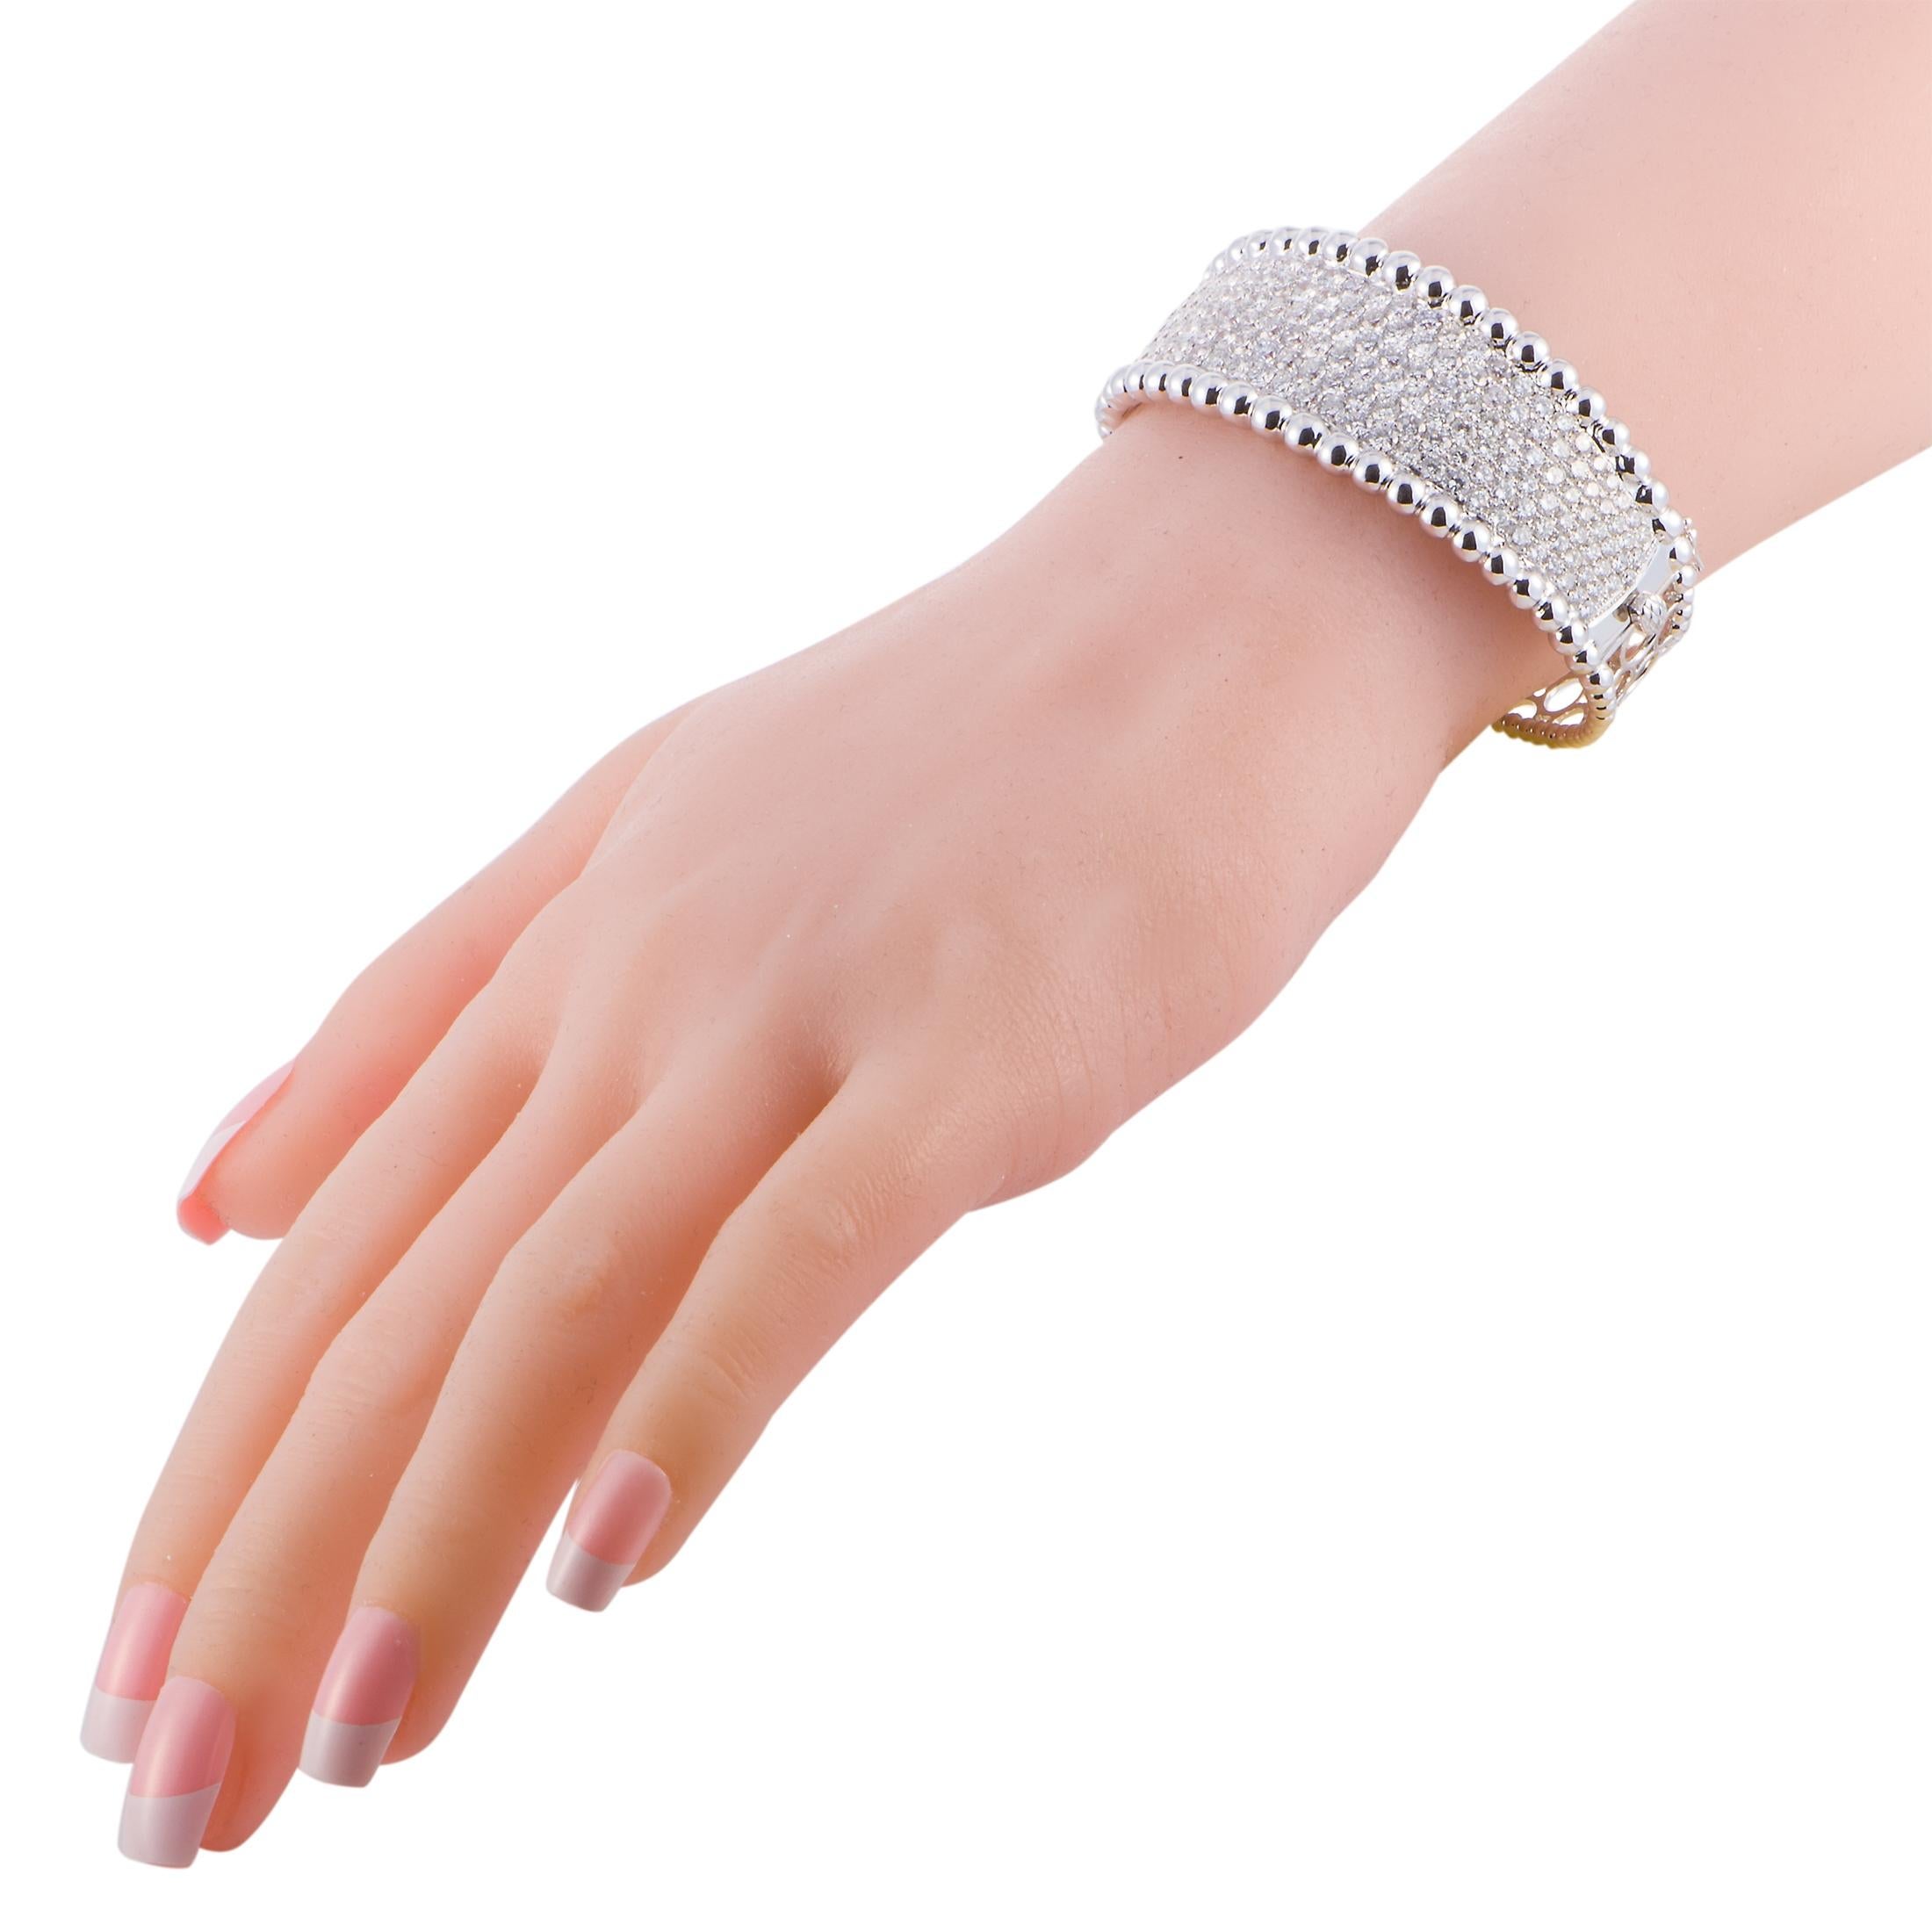 This LB Exclusive bracelet is made out of 18K white gold and diamonds that total 12.51 carats. The bracelet weighs 47.5 grams and measures 7.85” in length, boasting a 2.50” diameter.
 
 Offered in brand new condition, this jewelry piece includes a